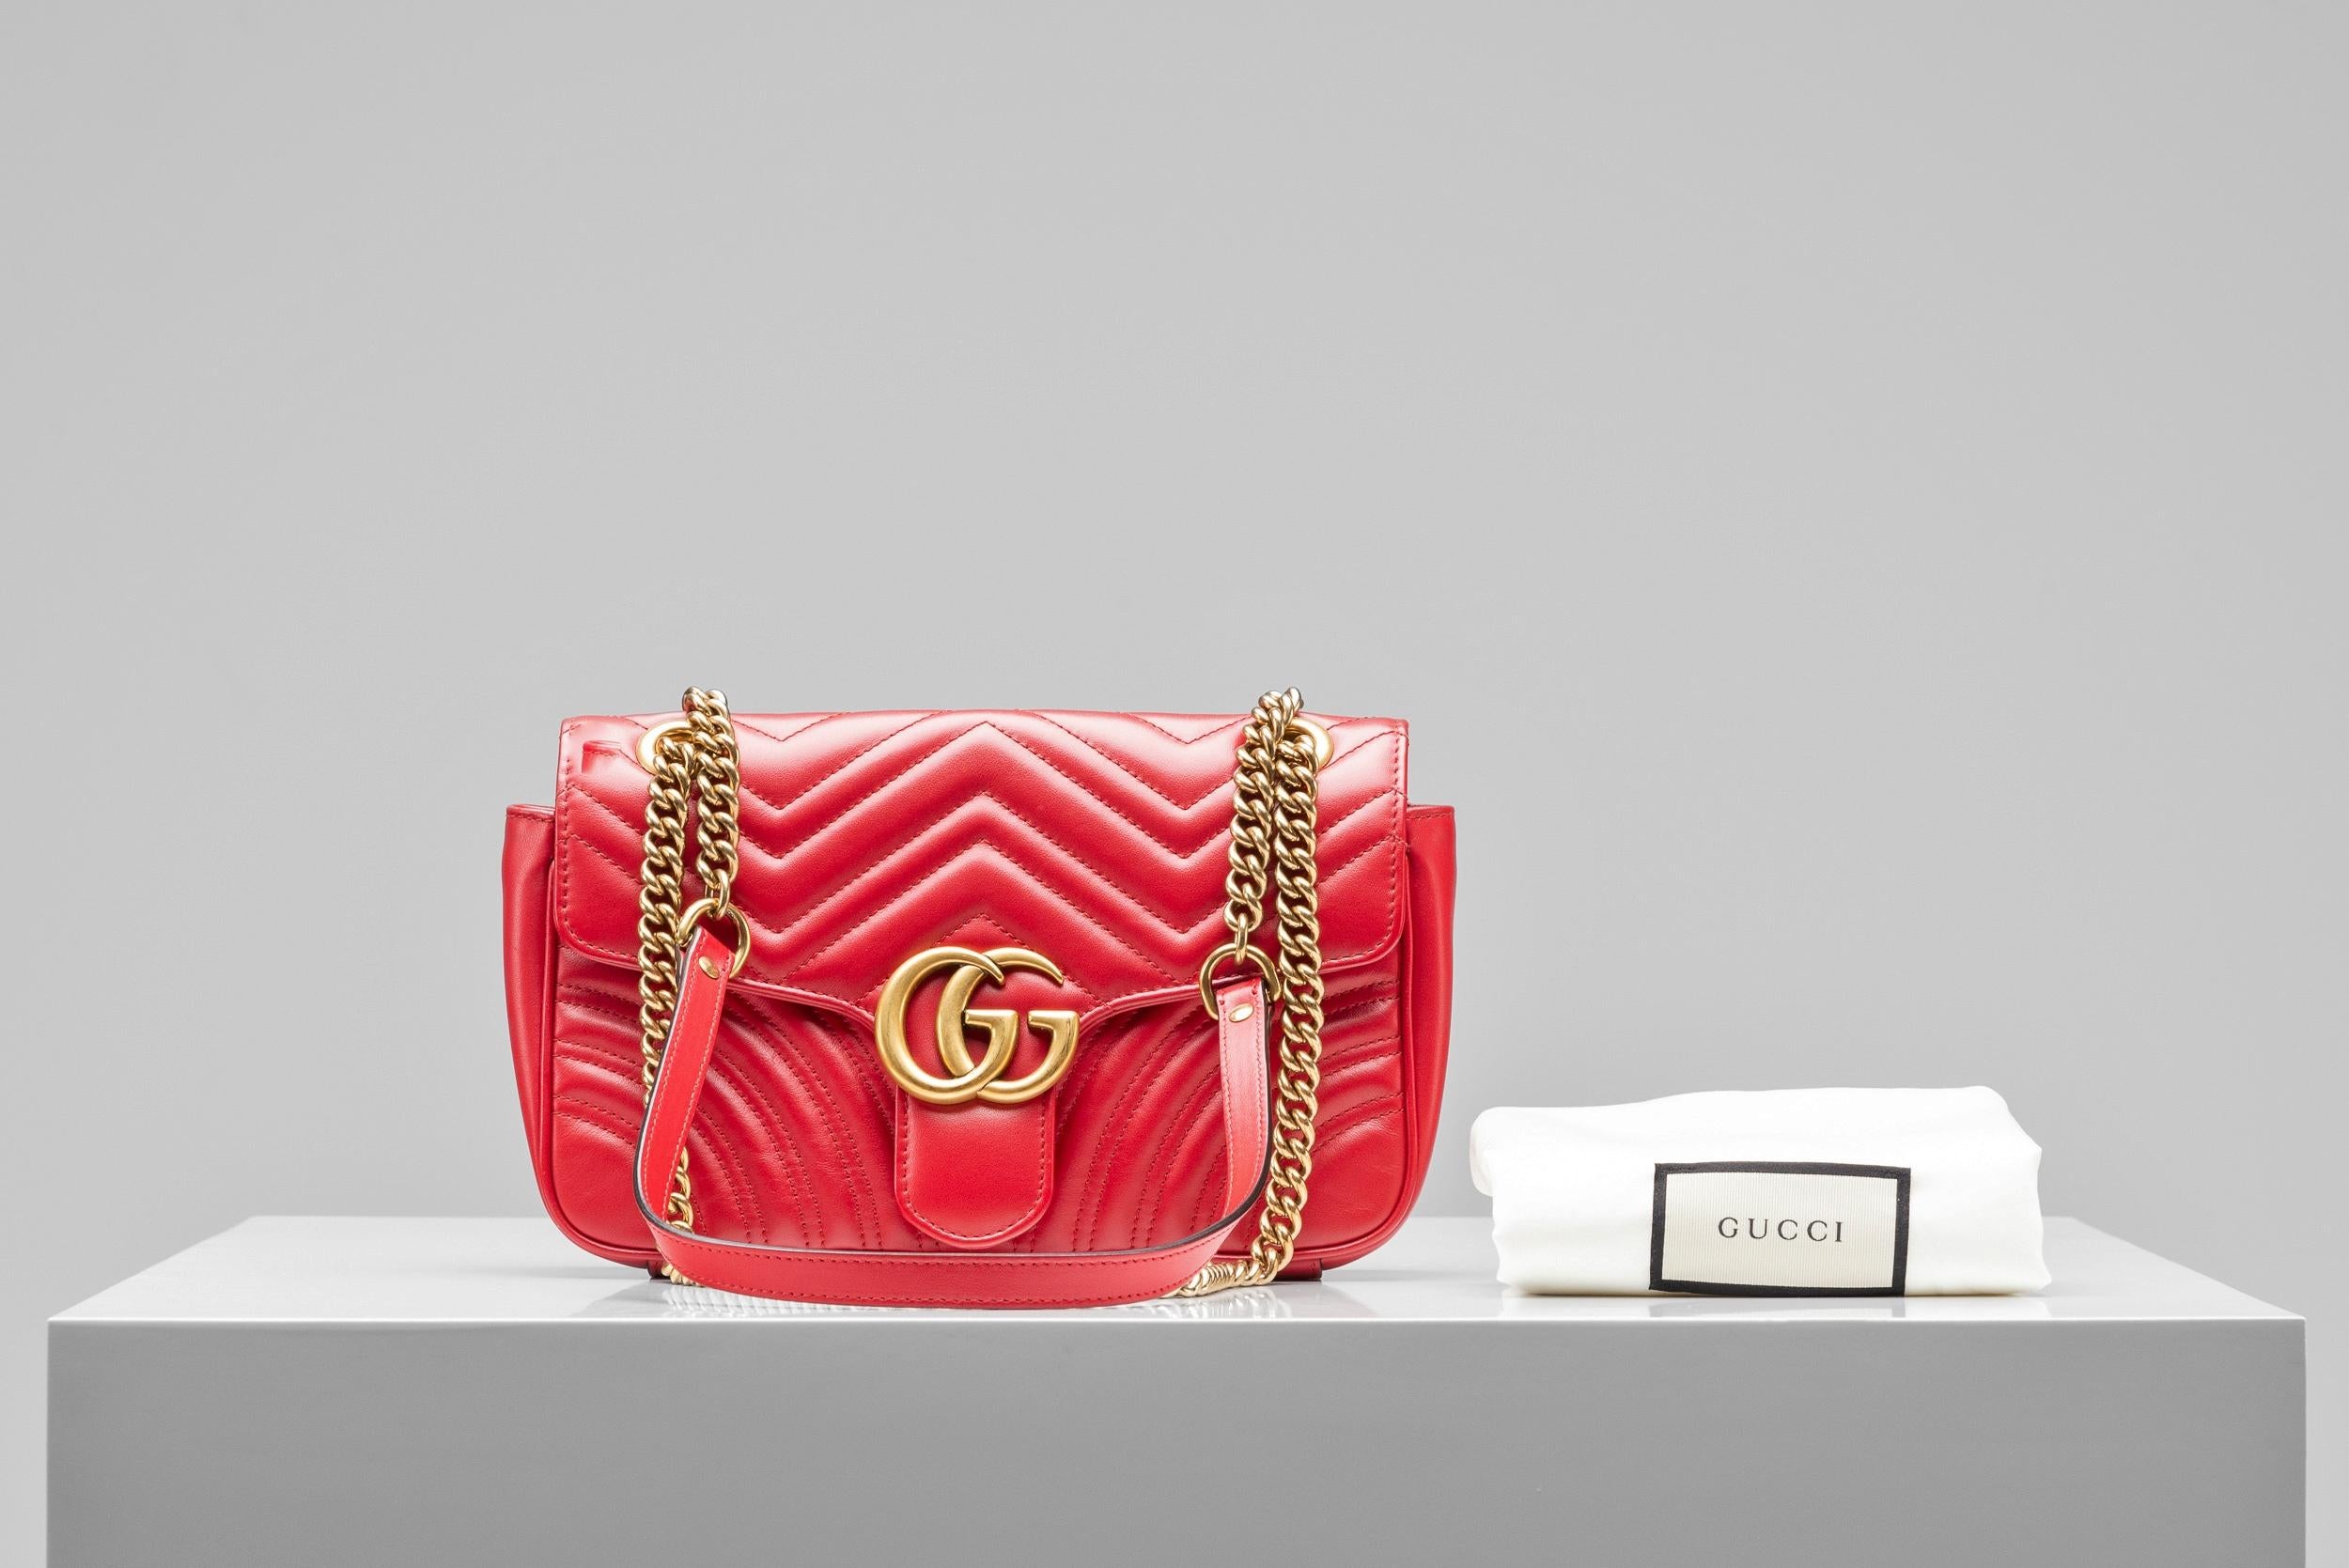 From the collection of SAVINETI we offer this Gucci Marmont Bag:
-    Brand: Gucci
-    Model: Marmont 
-    Condition: Very Good Condition
-    Materials: Red matelassé chevron leather, gold-toned hardware 

Authenticity is our core value at